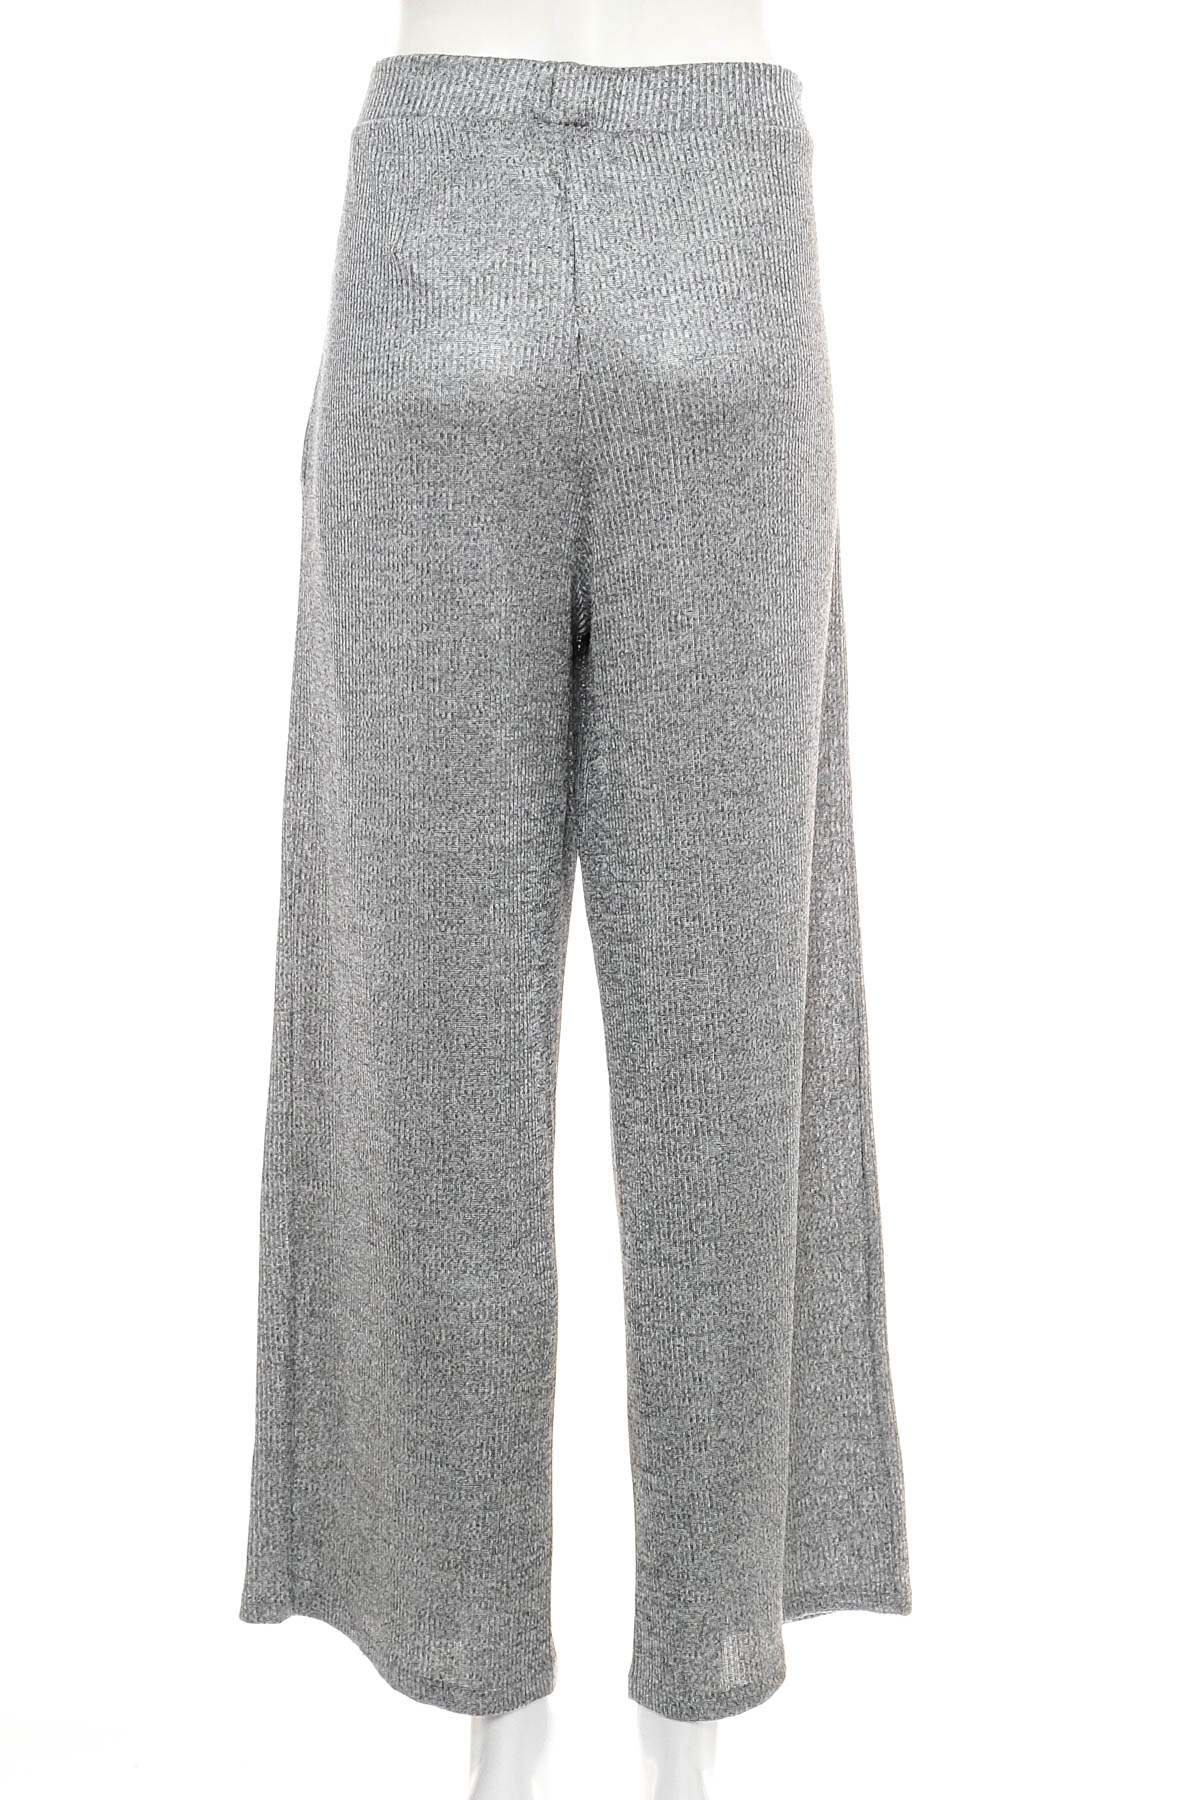 Women's trousers - LCW MODEST - 1